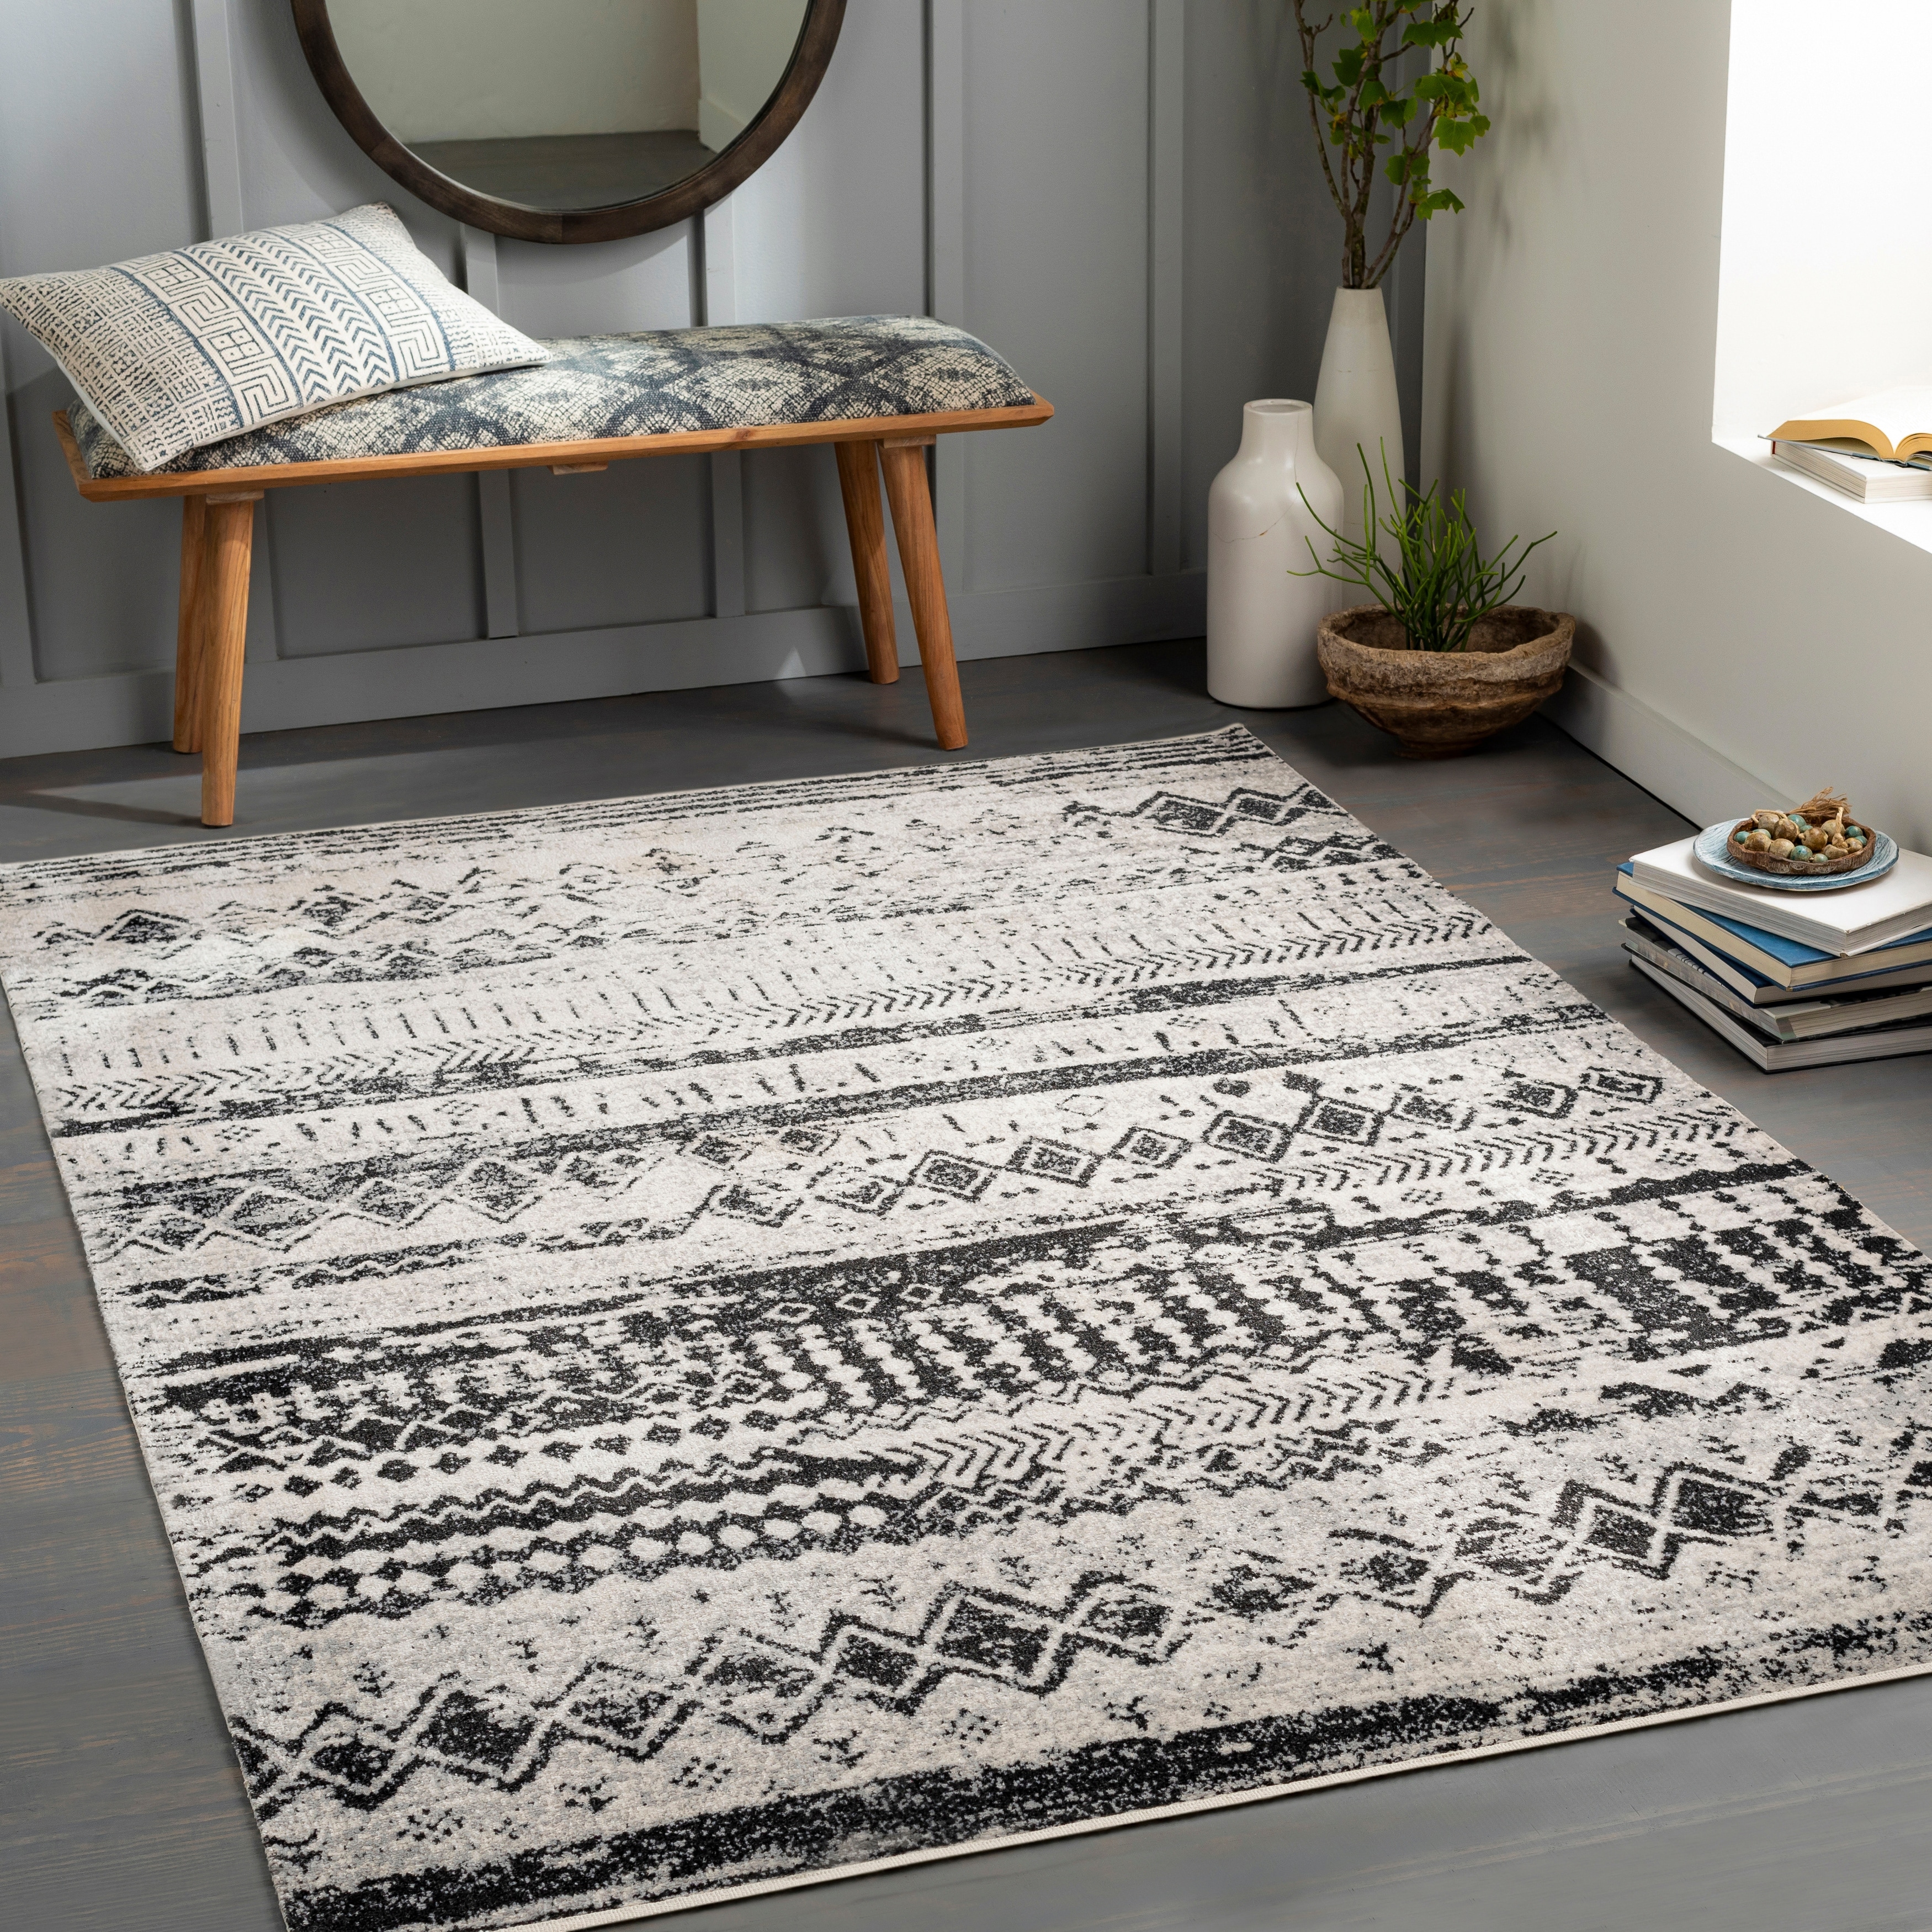 https://ak1.ostkcdn.com/images/products/is/images/direct/c478088eb1d525d5d4321b3d17e2e42ed17e9387/Trina-Bohemian-Machine-Washable-Area-Rug.jpg